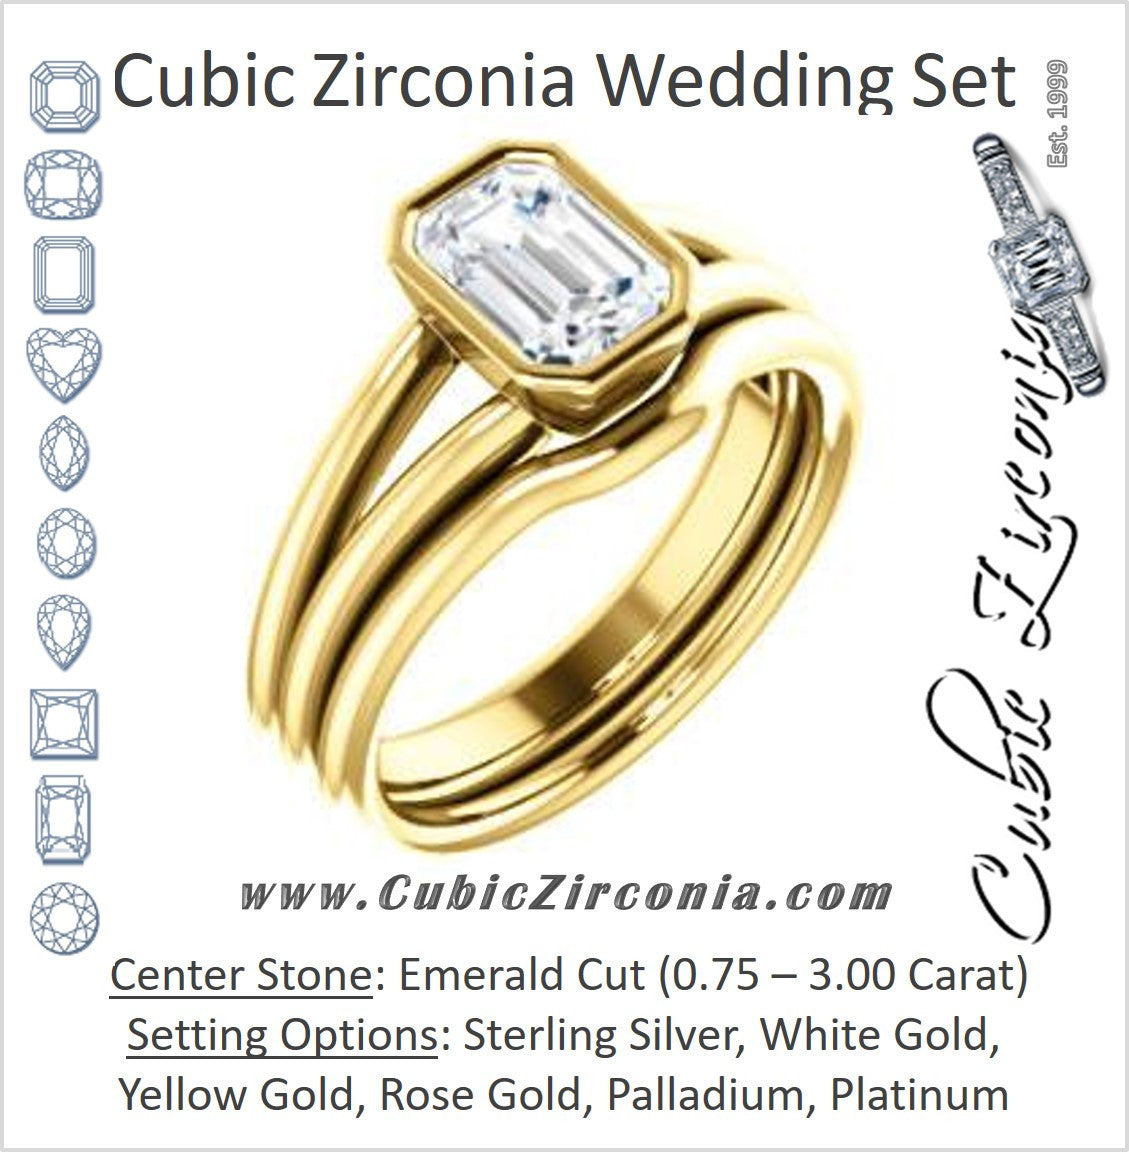 CZ Wedding Set, featuring The Shae engagement ring (Customizable Emerald Cut Split-Band Solitaire)